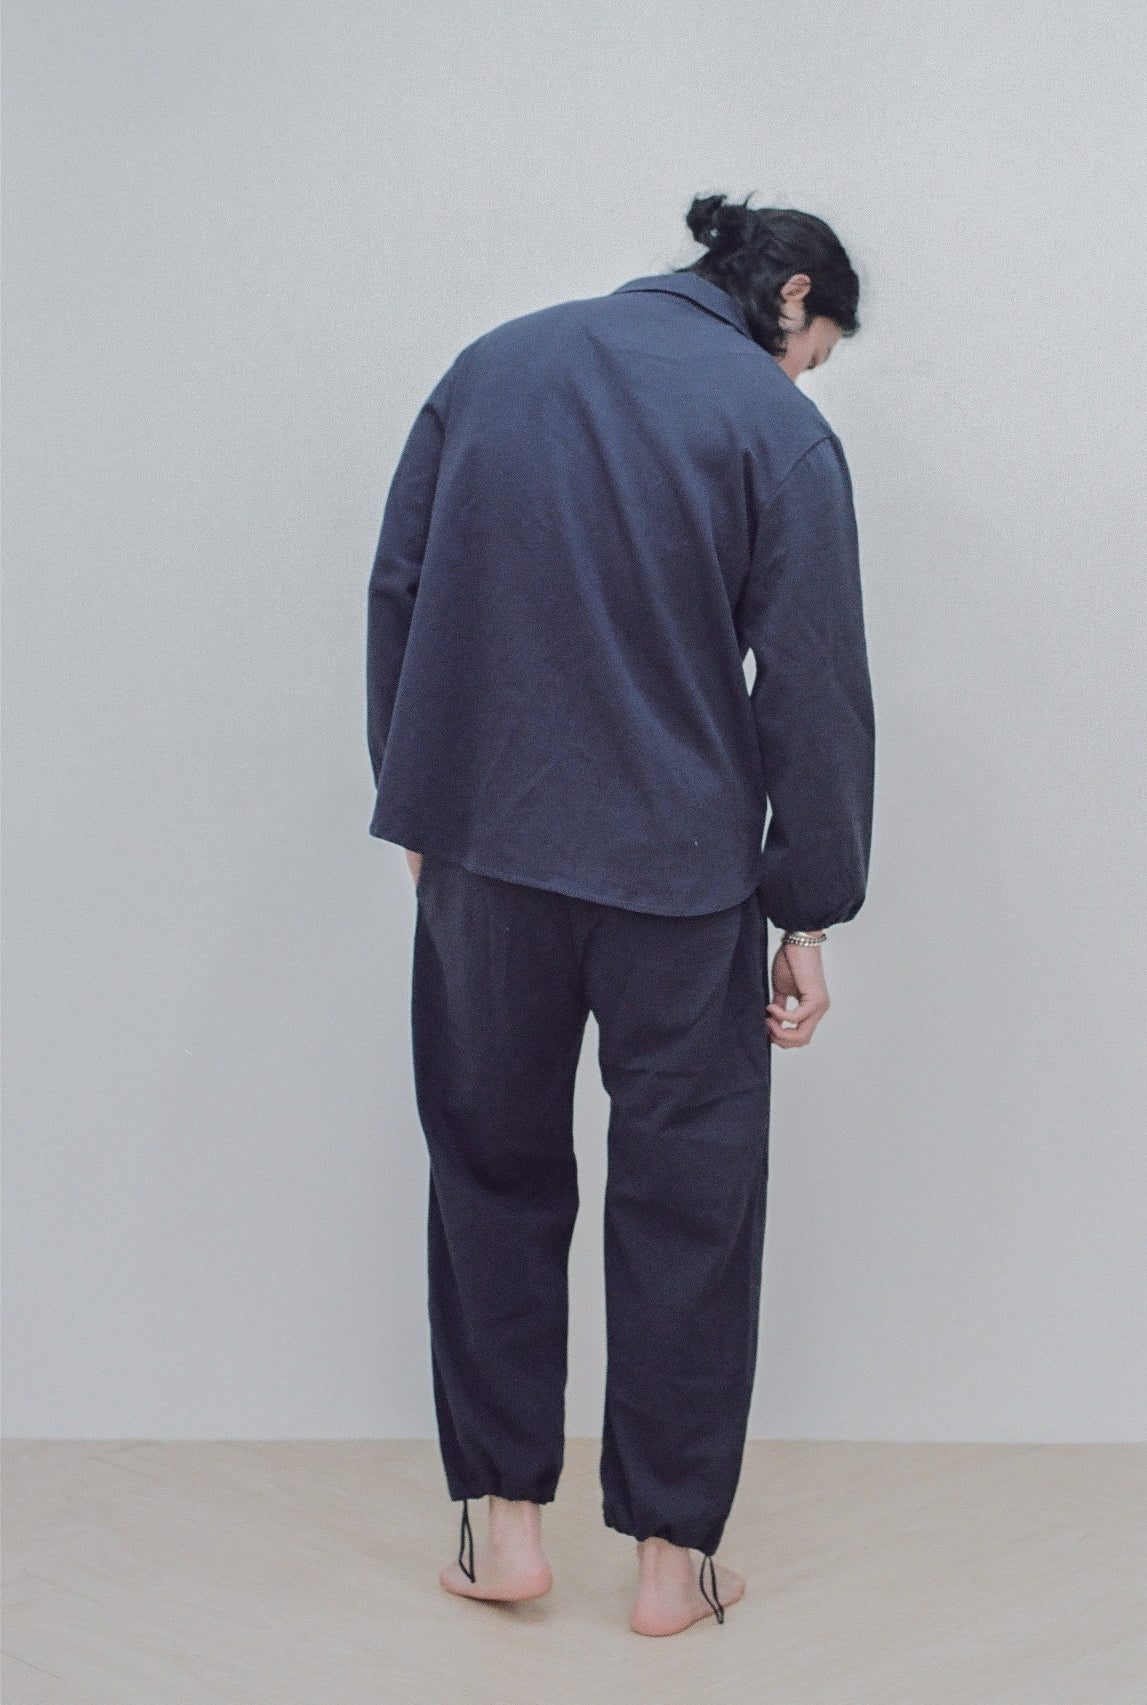 Workandhome Wear Project PANTS NAVY